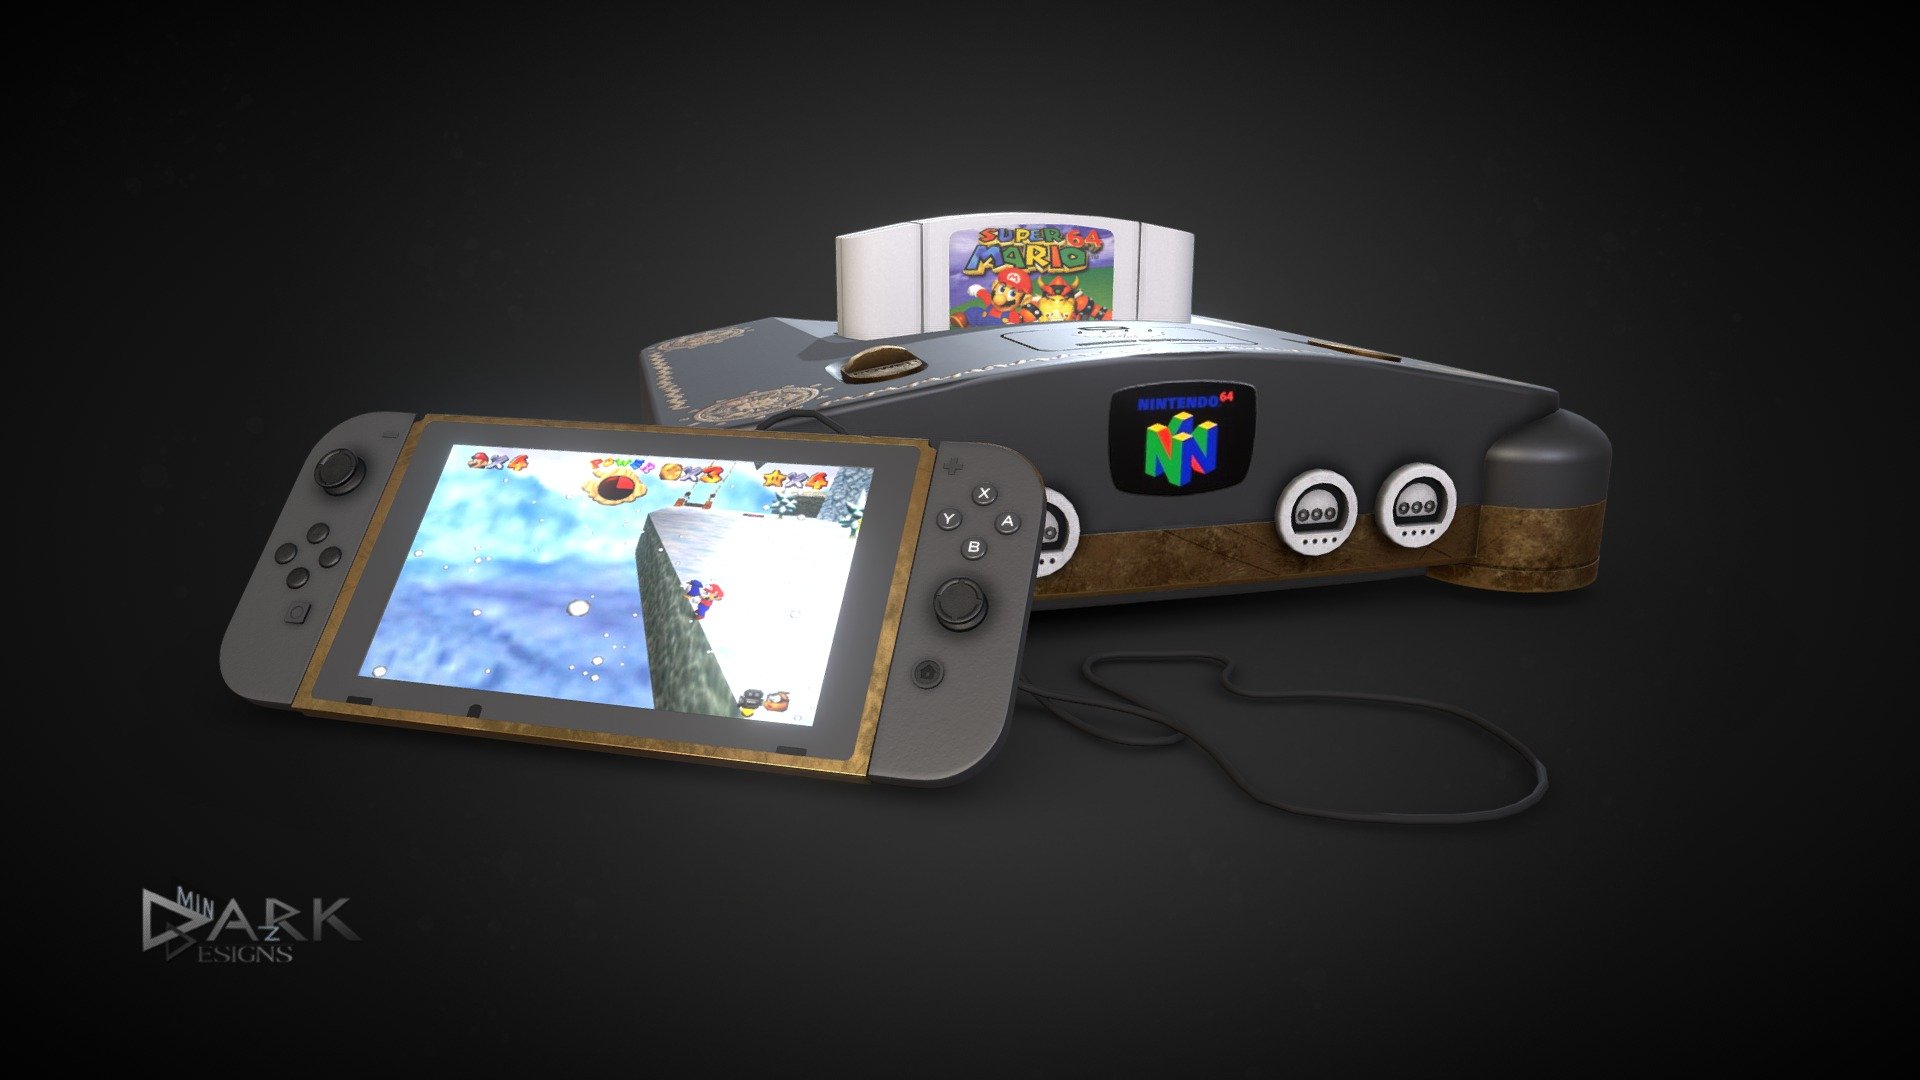 The Classic Nintendo 64, one of the most loved consoles of all Time mixed with the newest Handheld from Nintendo. Maybe one day this will not just be a dream concept but reality. 

Modeled for the RetroElectronicsChallenge - Nintendo 64 with Switch Controler - 3D model by dark-minaz 3d model